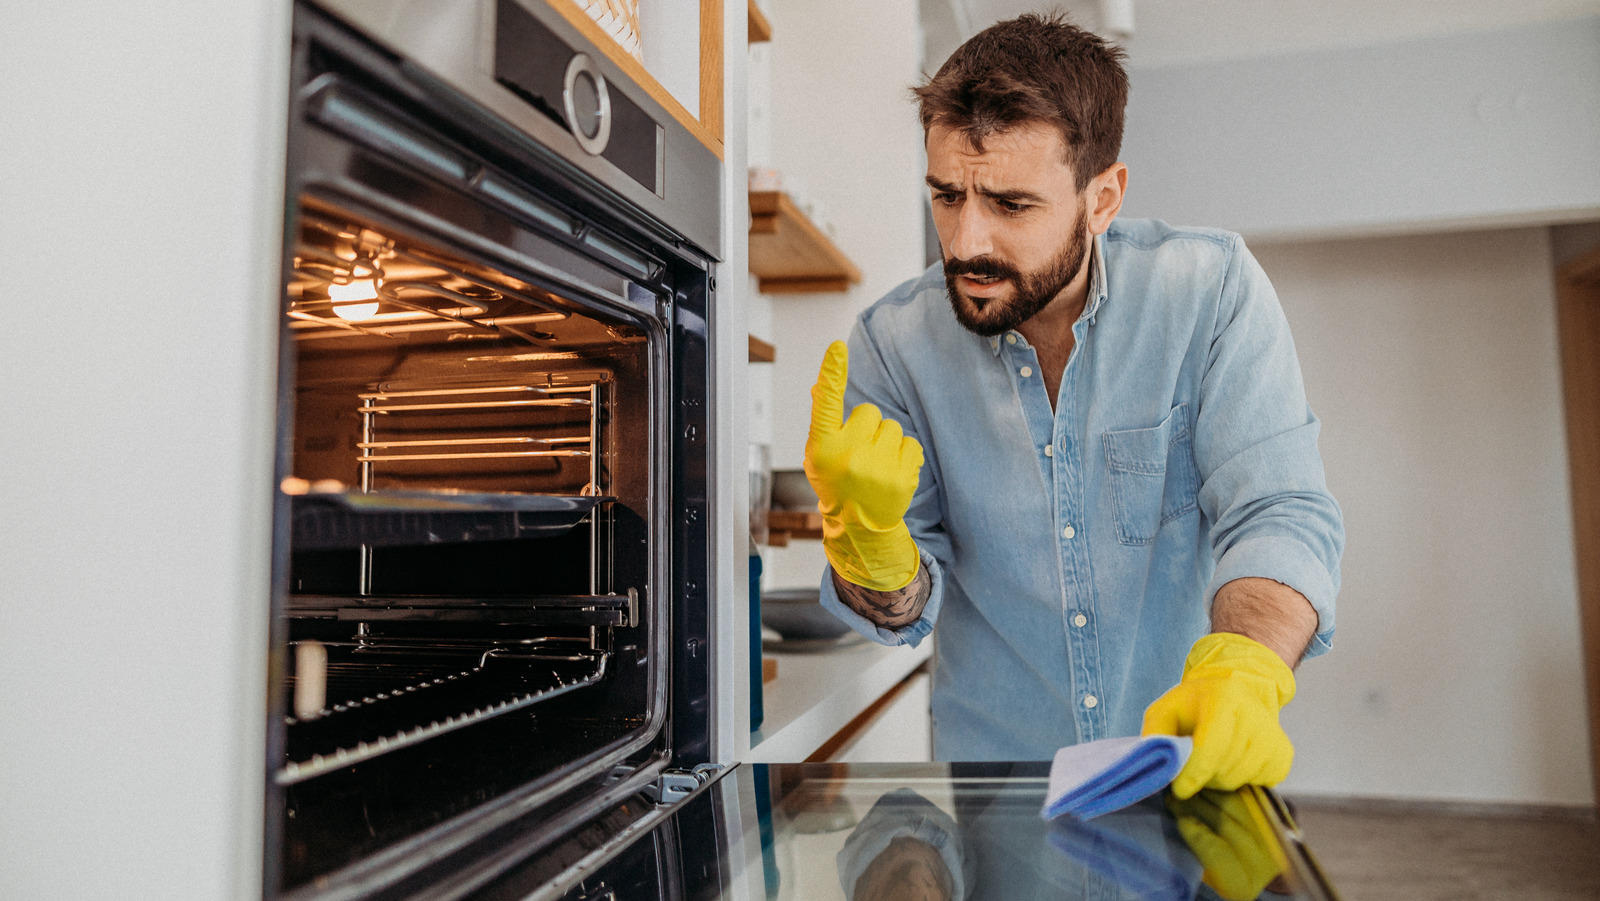 13 Oven Cleaning Mistakes You Need To Avoid – The Daily Meal